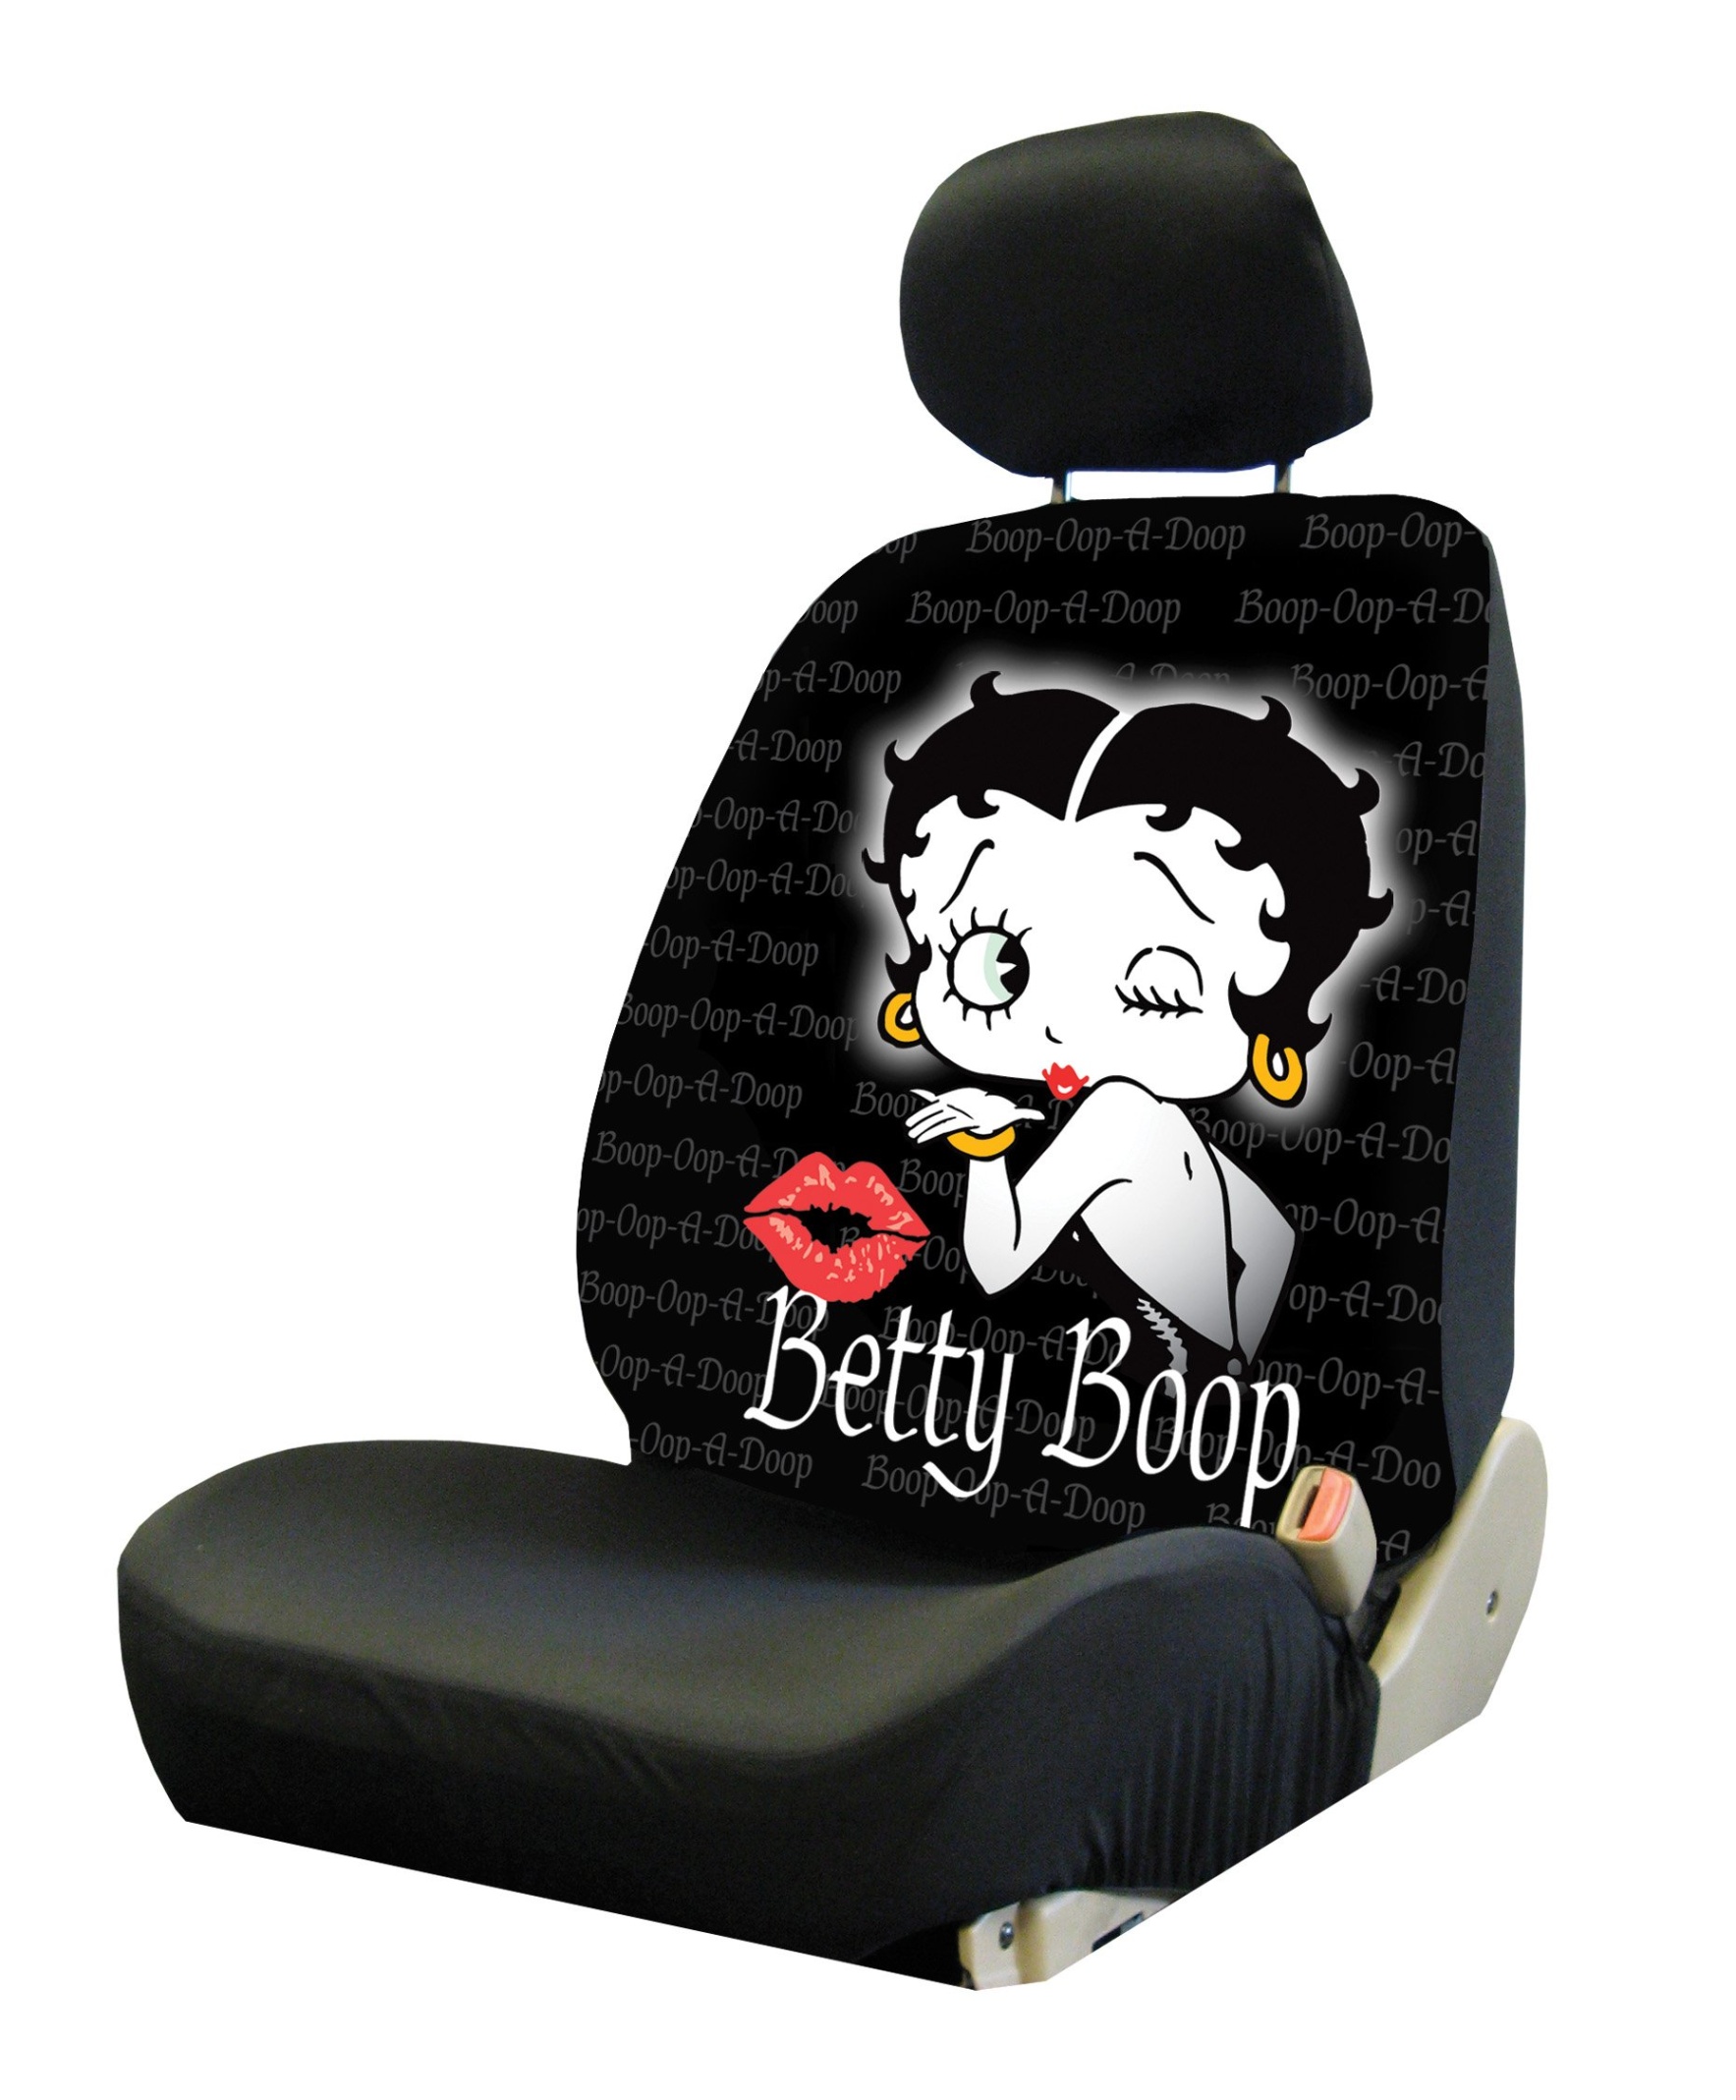 Rev Up Your Ride With Fun Betty Boop Car Accessories!